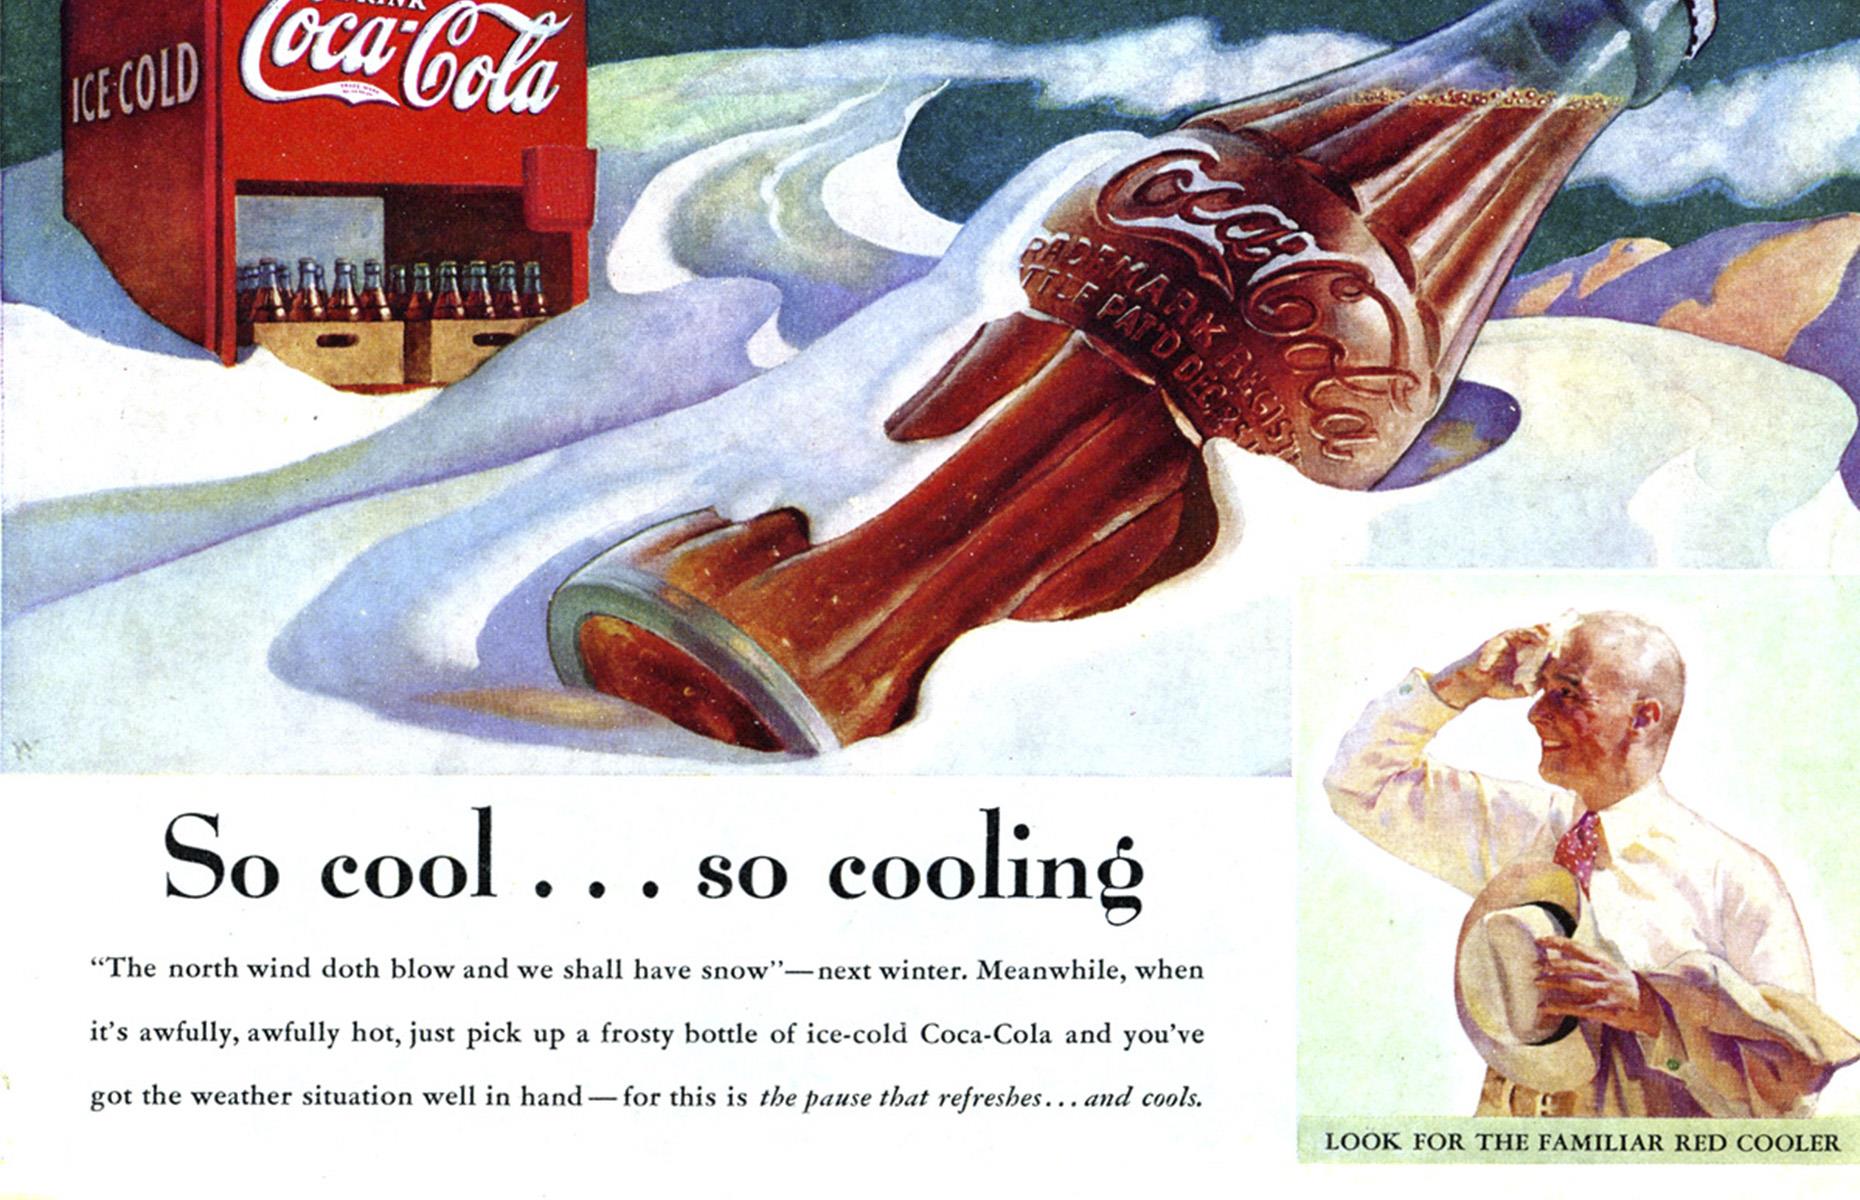 <p>As part of its marketing strategy to make Coca-Cola seem better than its competitors, the company declared there was a perfect temperature at which the drink should be served: between 34°F and 38°F (1°C and 3.3°C). In 1919, it even sent salesmen to new retailers to enforce these standards.</p>  <p><strong><a href="https://www.lovefood.com/galleries/96731/which-vintage-food-adverts-do-you-remember-from-your-childhood">Check out more vintage food adverts from your childhood</a></strong></p>